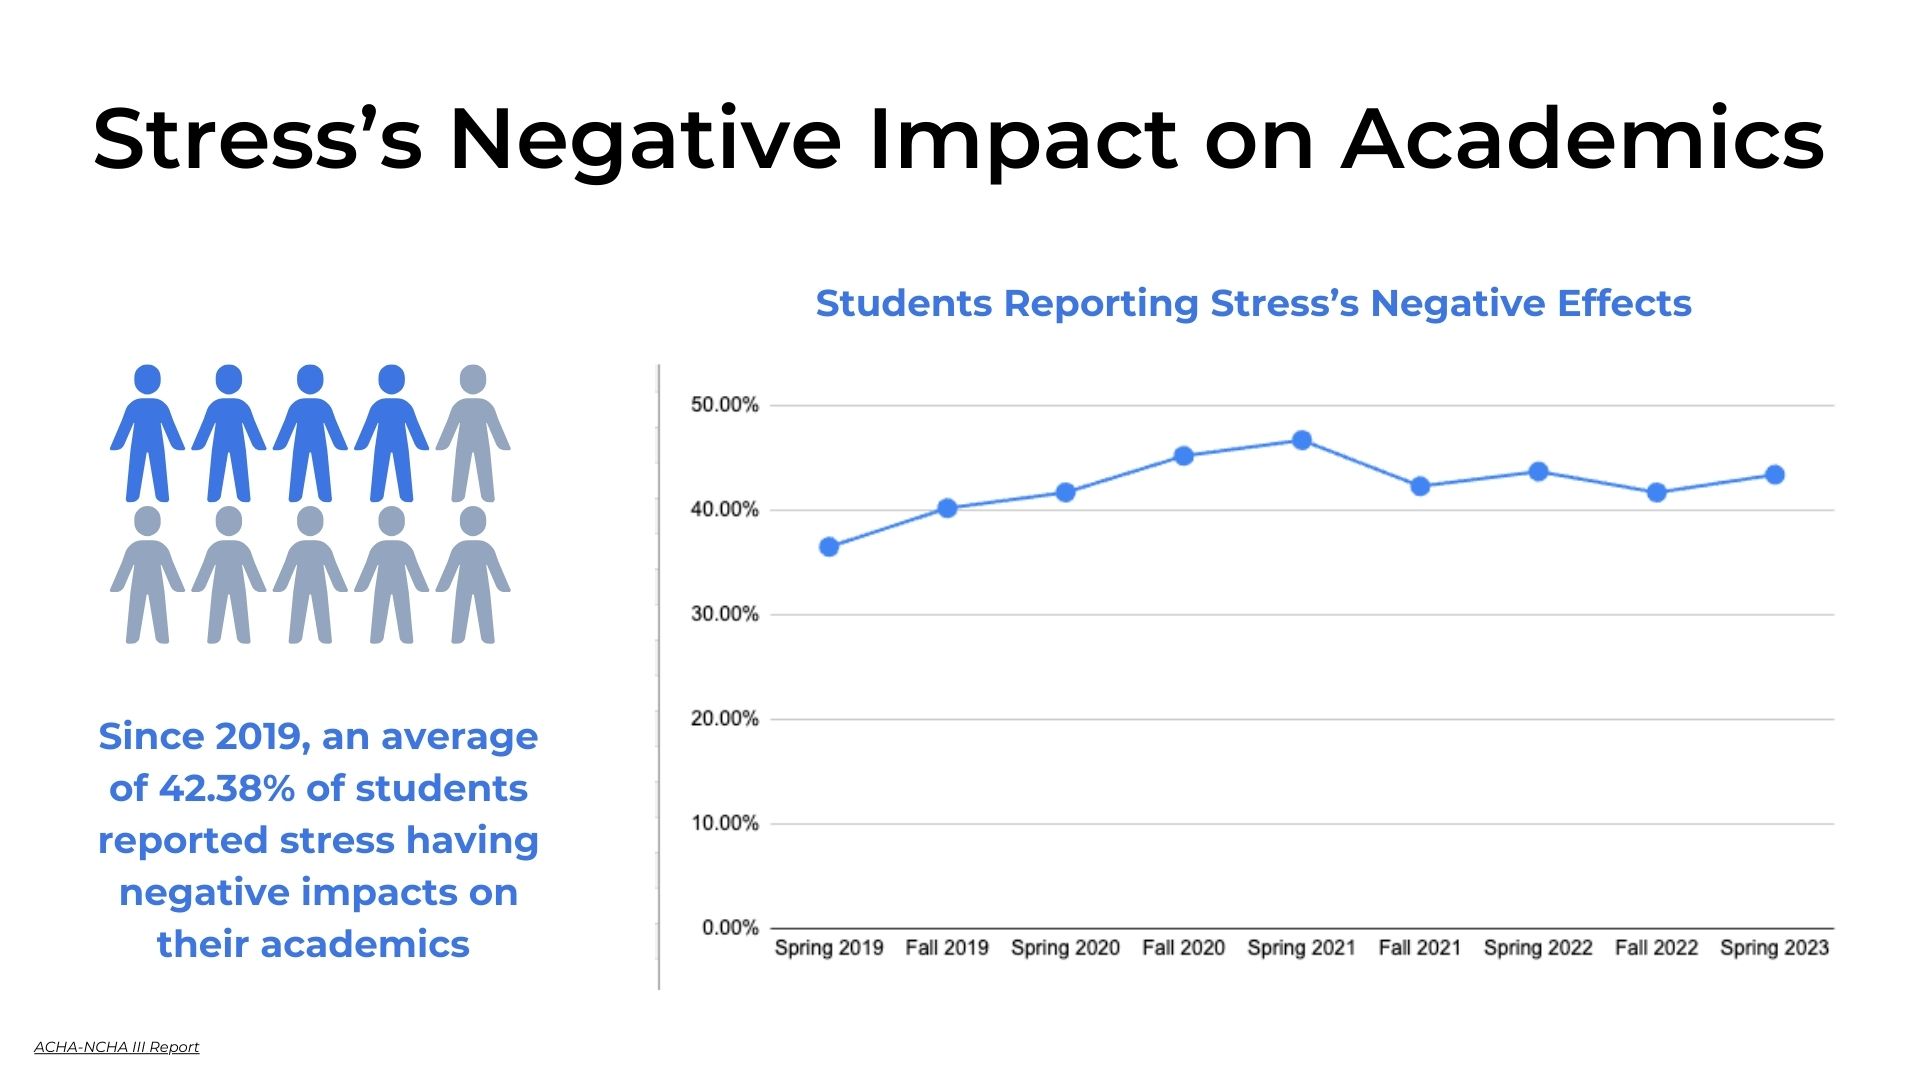 Stress's Negative Impact on Academics: Since 2019, an average of 42.38% of students reported stress having negative impacts on academics. Graph showing percentage of students reporting stress's negative effects from Spring 2019 to Spring 2023.